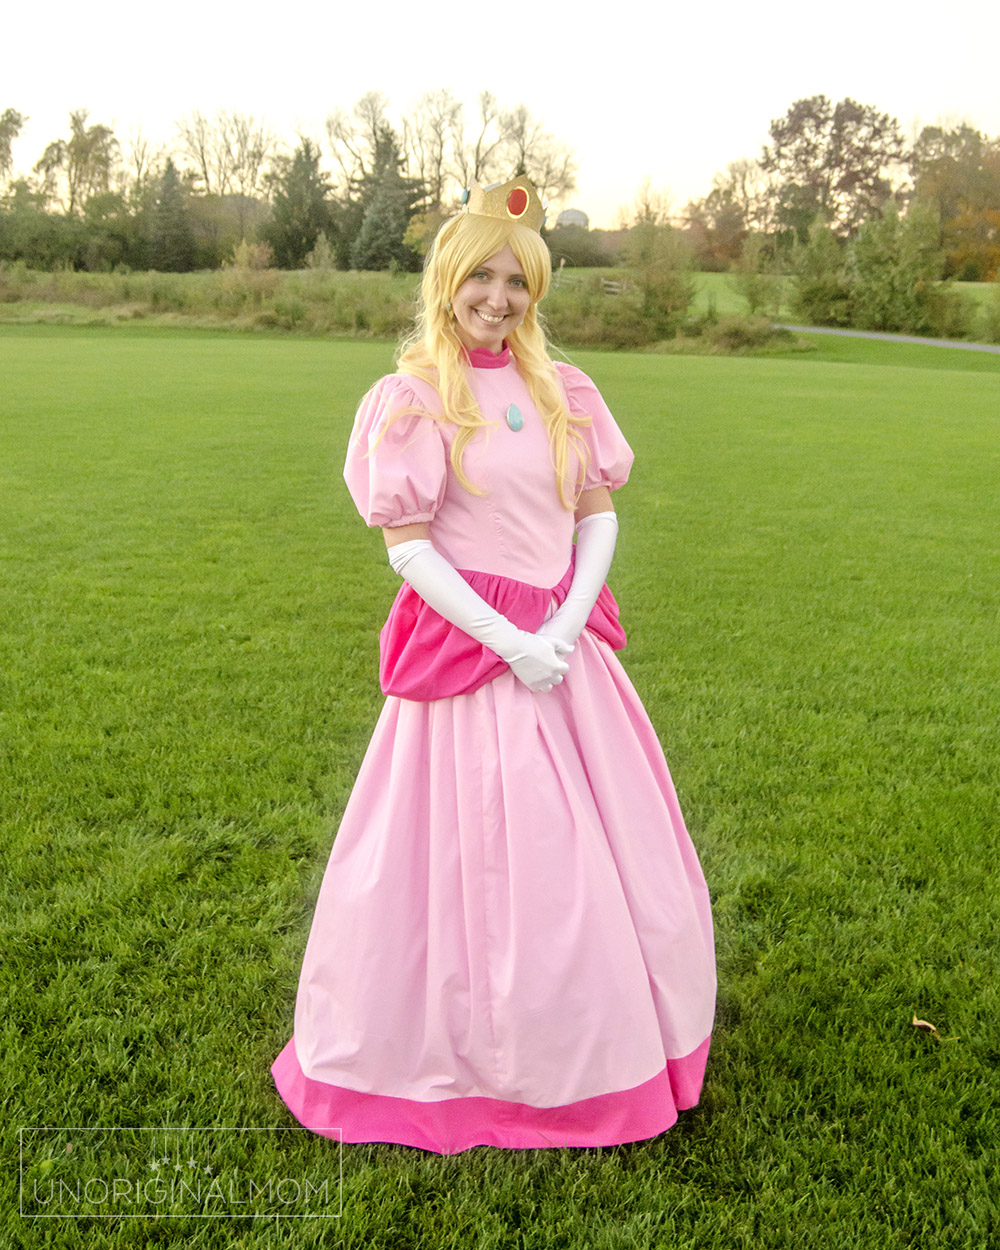 DIY Princess Peach costume for adults from a dress pattern